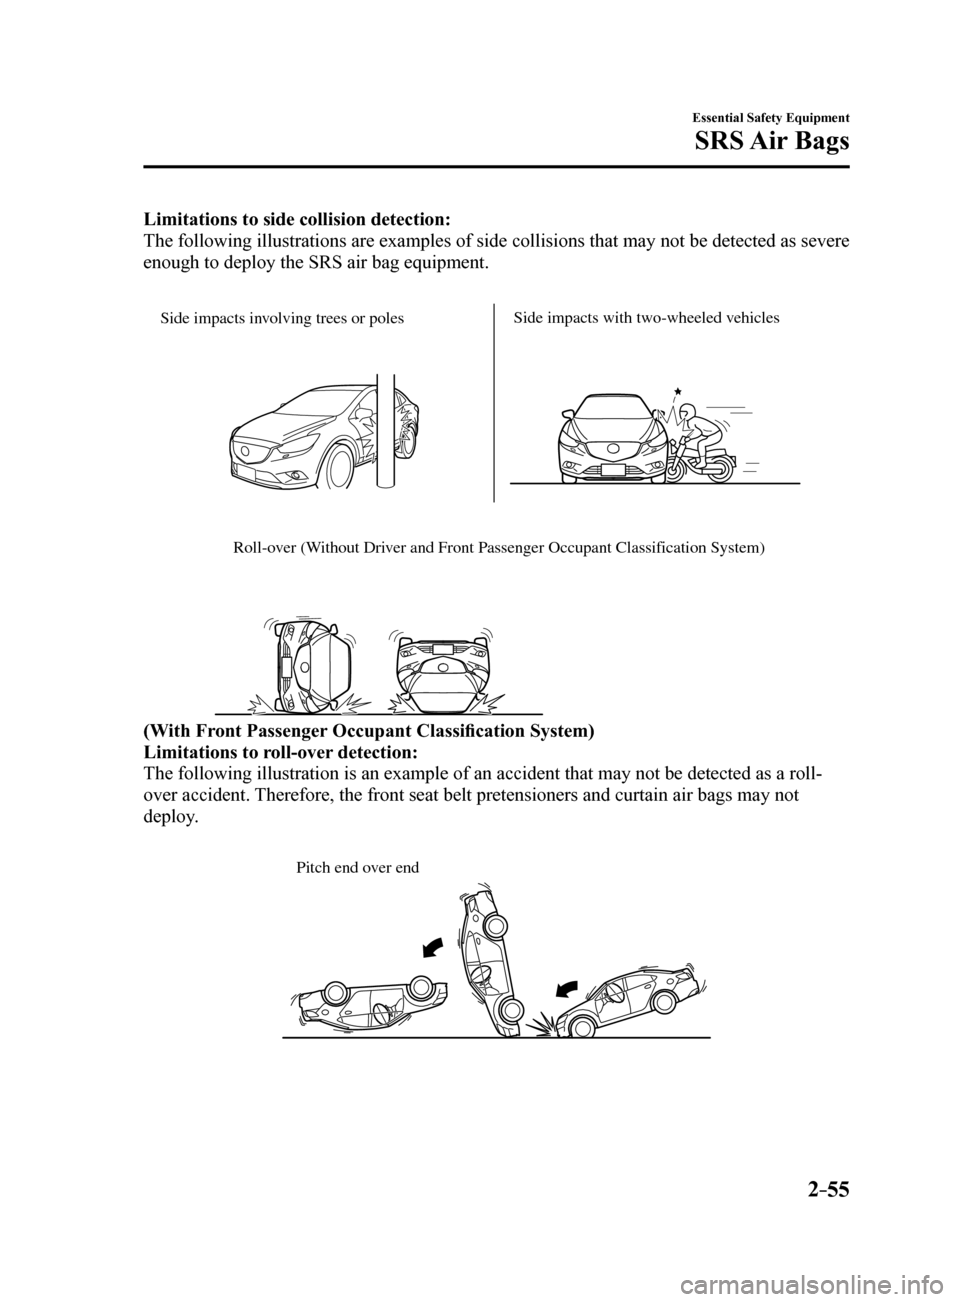 MAZDA MODEL 6 2017   (in English) Repair Manual 2–55
Essential Safety Equipment
SRS Air  Bags
Limitations to side collision detection:
The following illustrations are examples of side collisions that may not\
 be detected as severe 
enough to dep